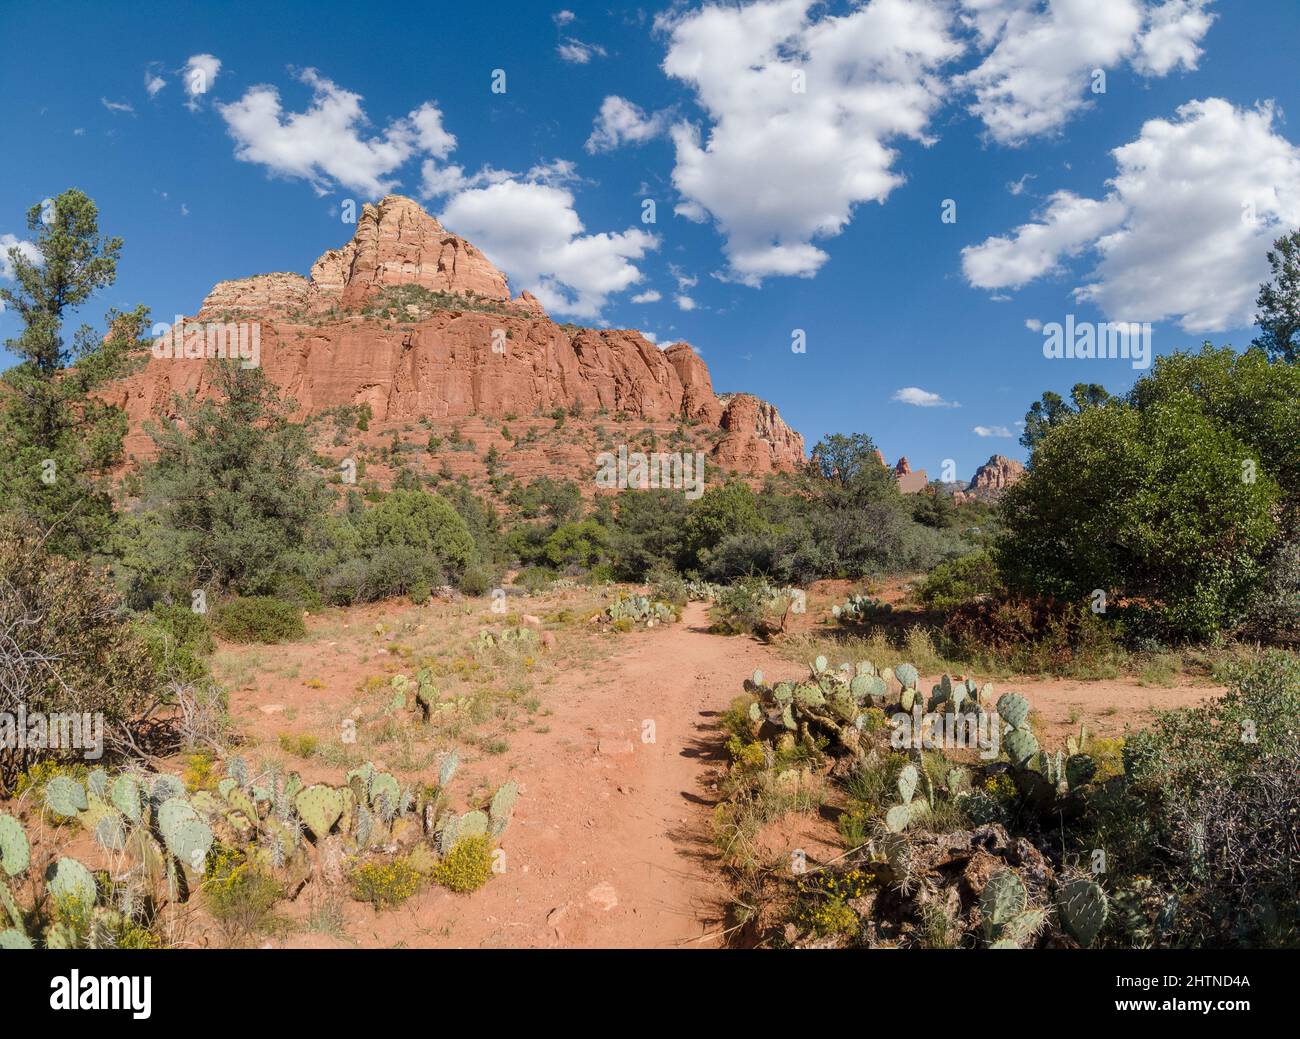 Dirt hiking path going through the desert leading to a large rock formation. Stock Photo